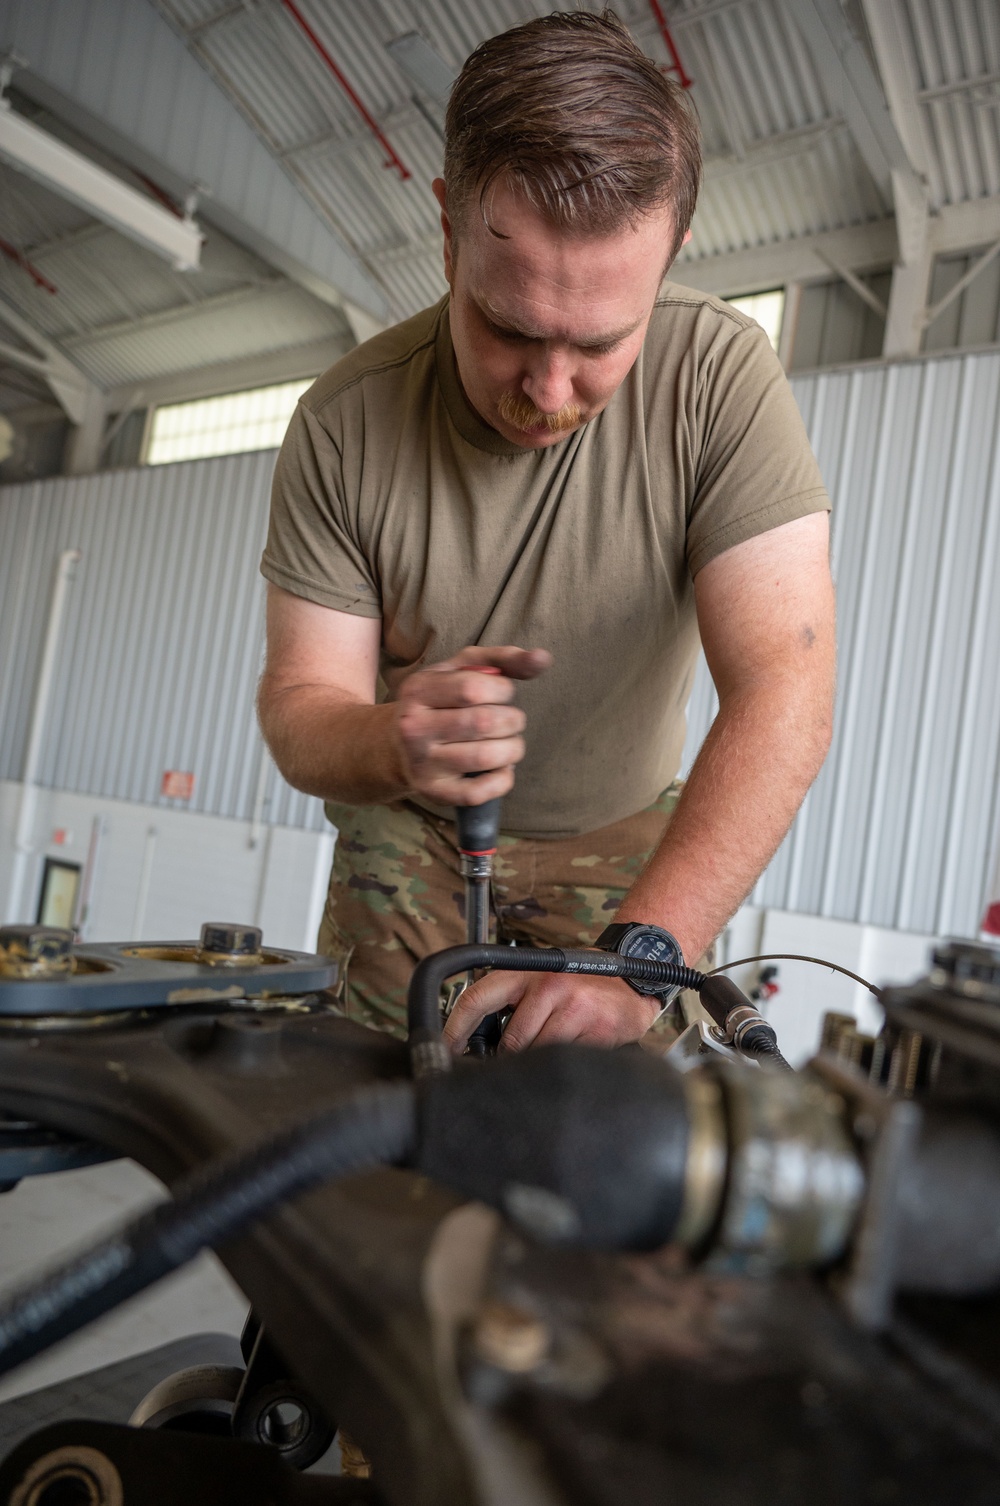 920th Aircraft Maintenance Squadron remove spindles